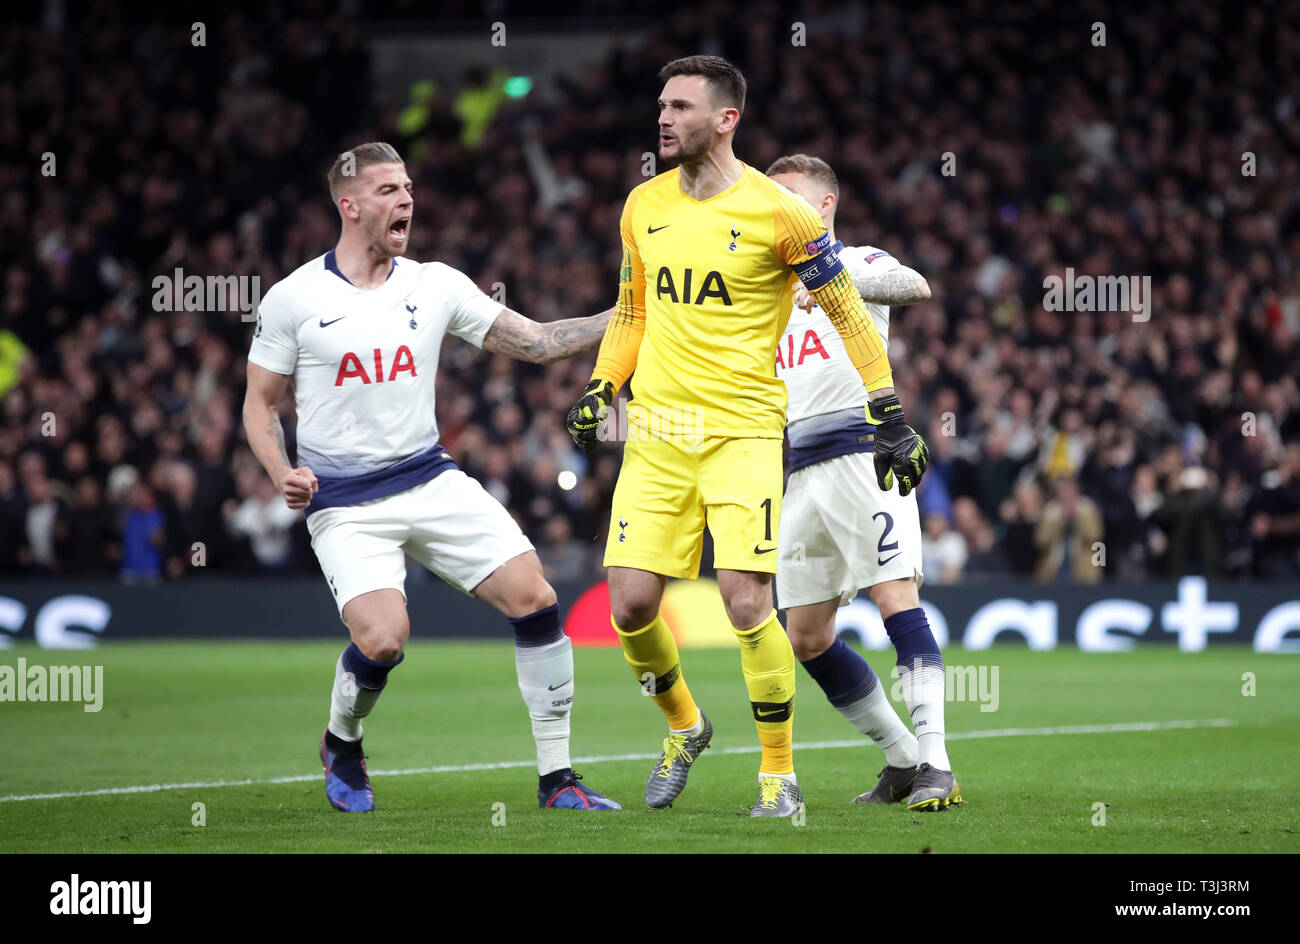 Kits by DarkHERO93 [2016/17 kits remake] - Page 22 Tottenham-hotspur-goalkeeper-hugo-lloris-centre-is-congratulated-by-toby-alderweireld-left-after-saving-a-penalty-from-manchester-citys-sergio-aguero-not-pictured-during-the-uefa-champions-league-quarter-final-first-leg-match-at-tottenham-hotspur-stadium-london-T3J3RM